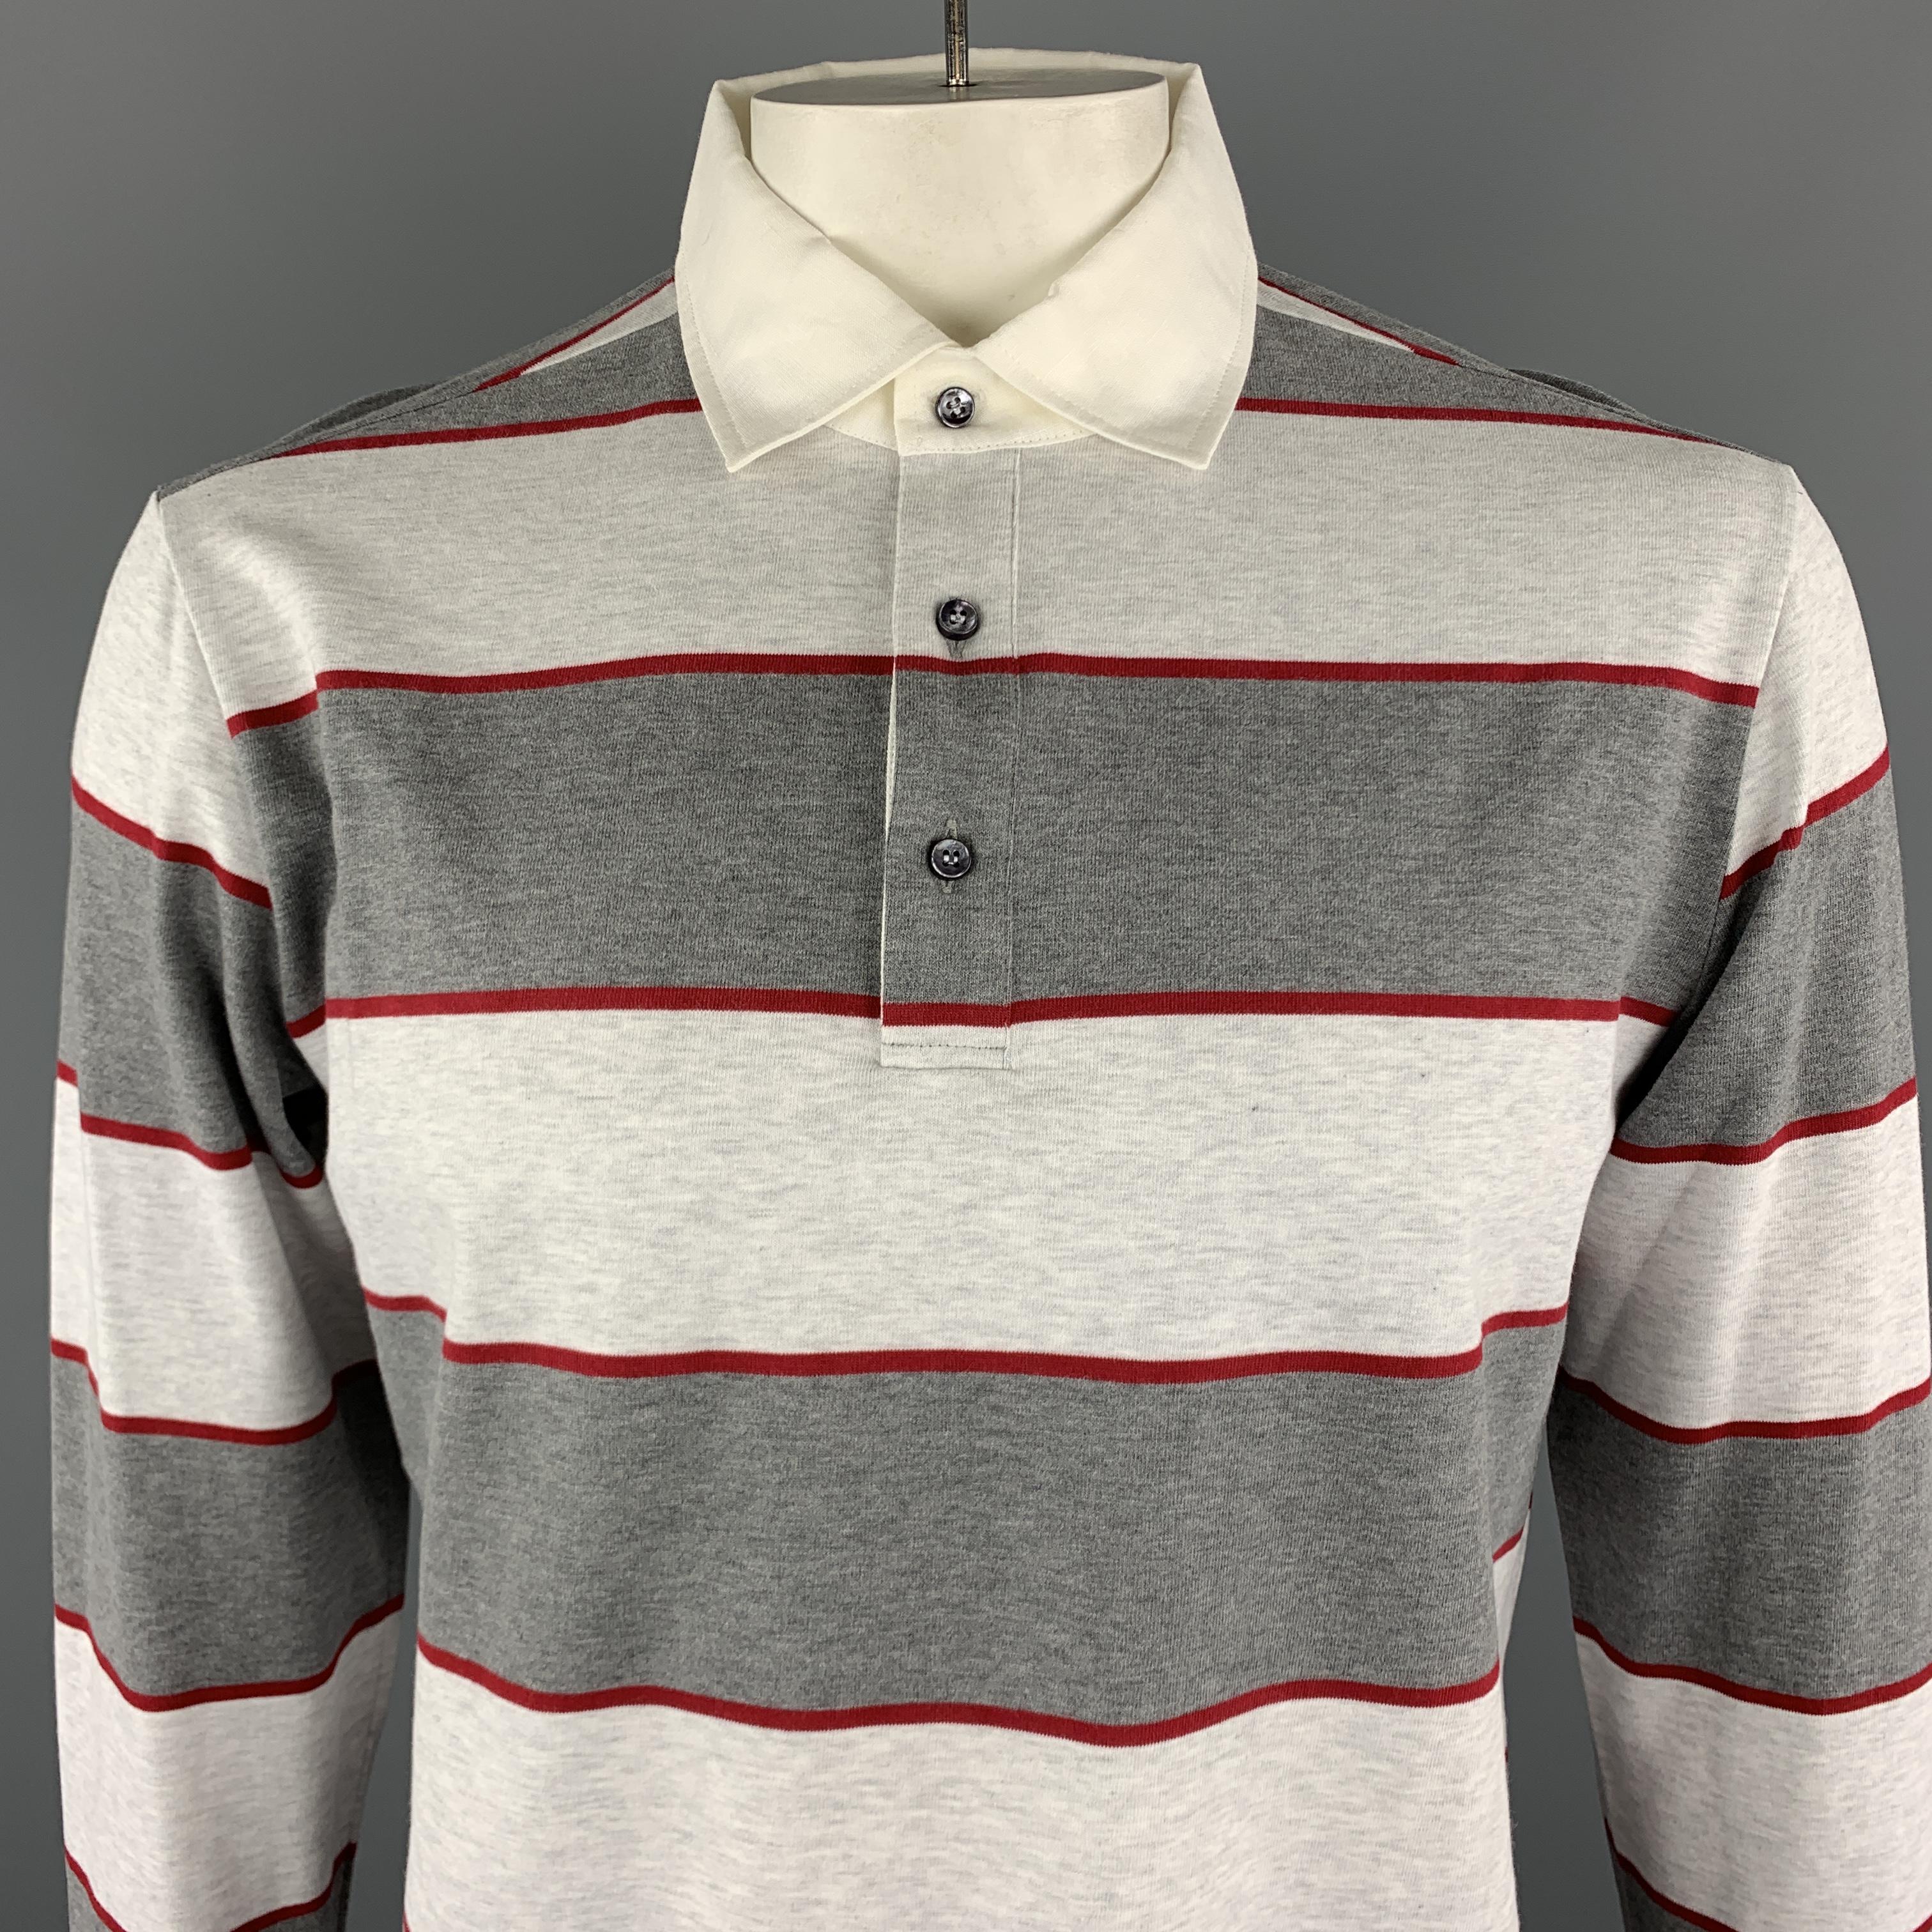 LORO PIANA Long Sleeve POLO comes in grey tones in a striped cotton material, half buttoned, with ribbed cuffs. Made in Italy.


New with Tags.
Marked: XL

Measurements:

Shoulder: 18 in.
Chest: 44 in.
Sleeve: 25.5 in.
Length: 27.5 in. 